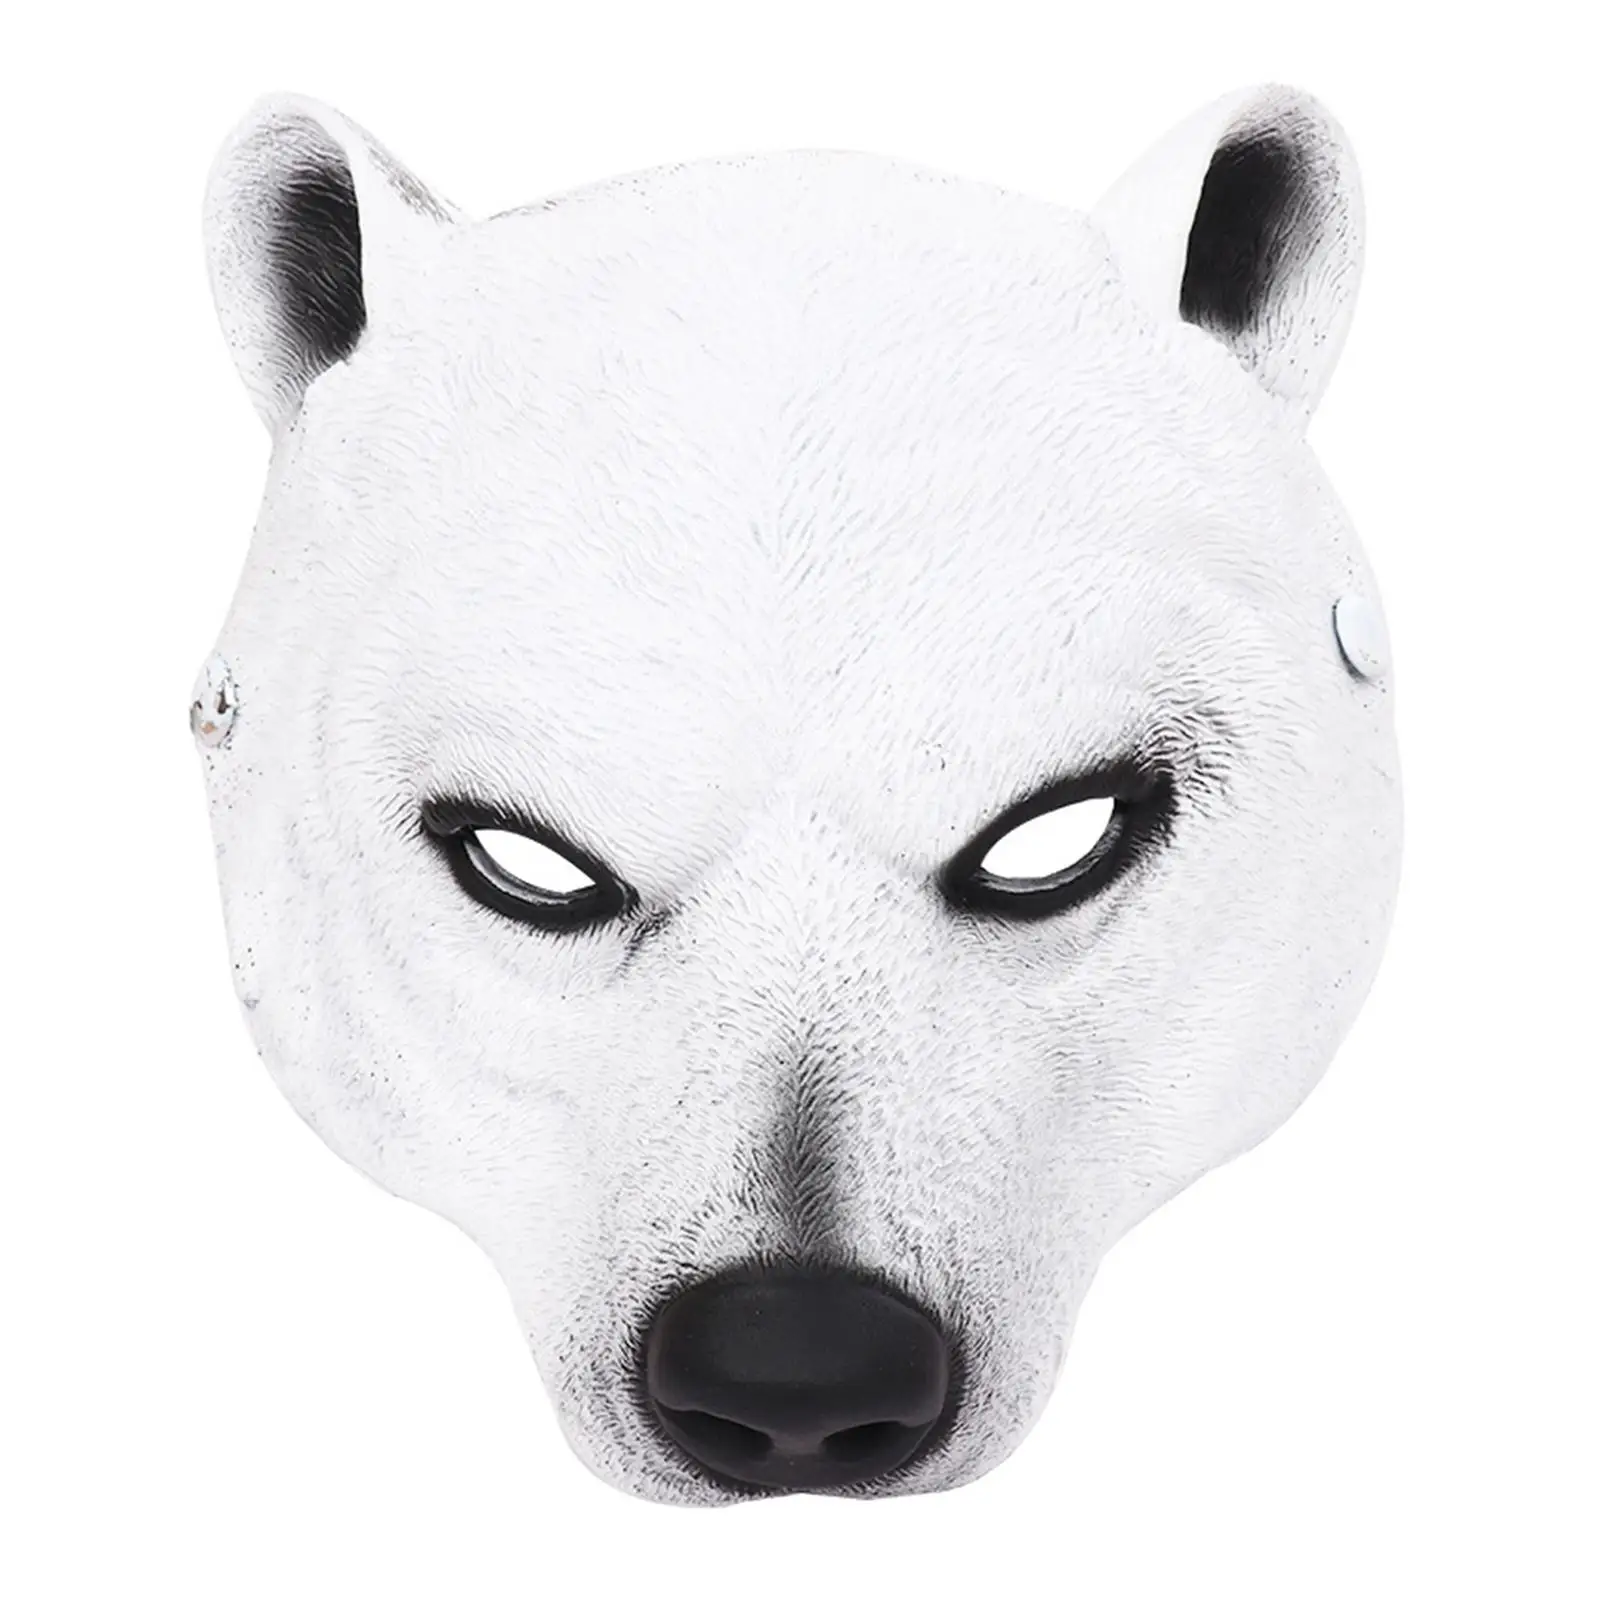 3D Halloween Bear Mask Lightweight Realistic Facial Cover Novelty Half Face Mask for Festival Costume Masquerade Party Props